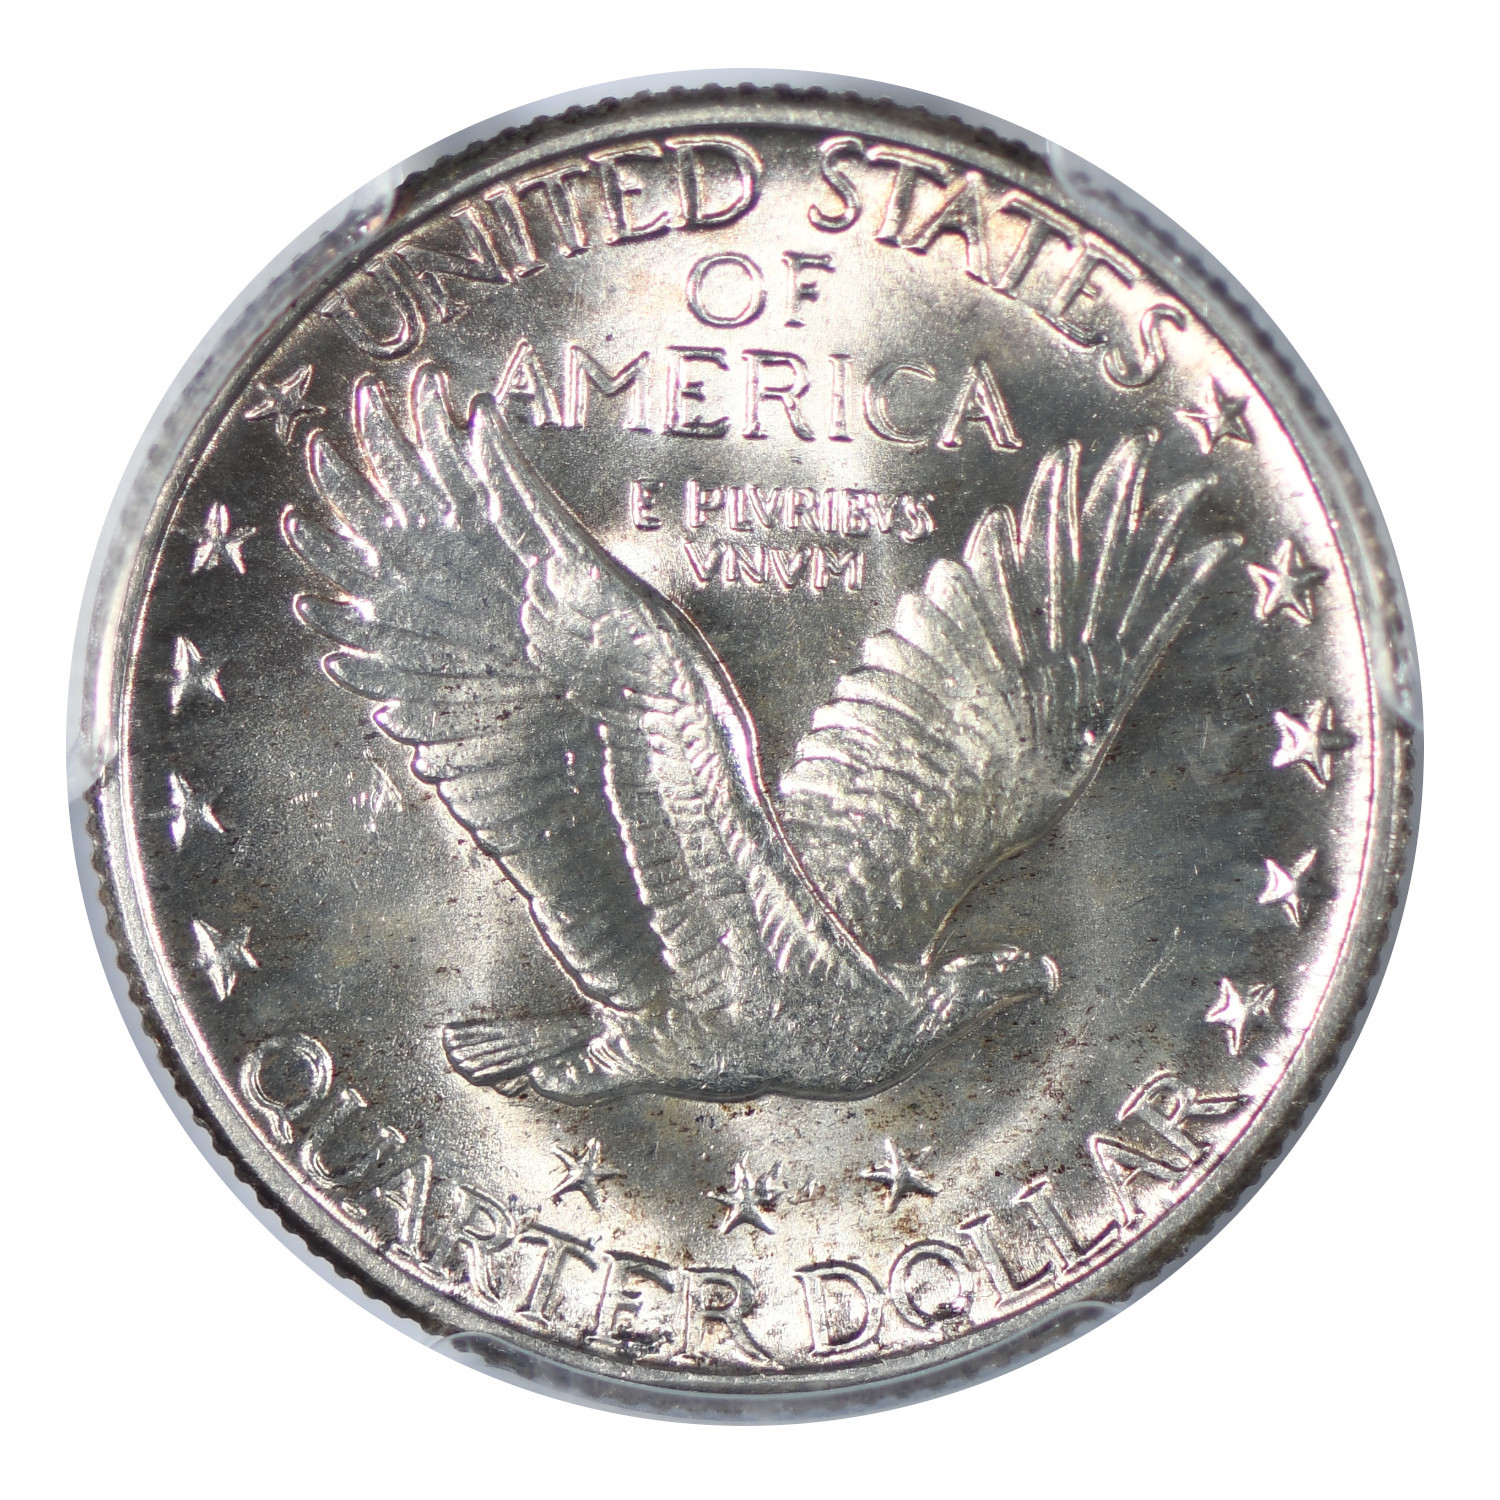 1930 Standing Liberty Quarter PCGS Certified MS65FH - Olevian